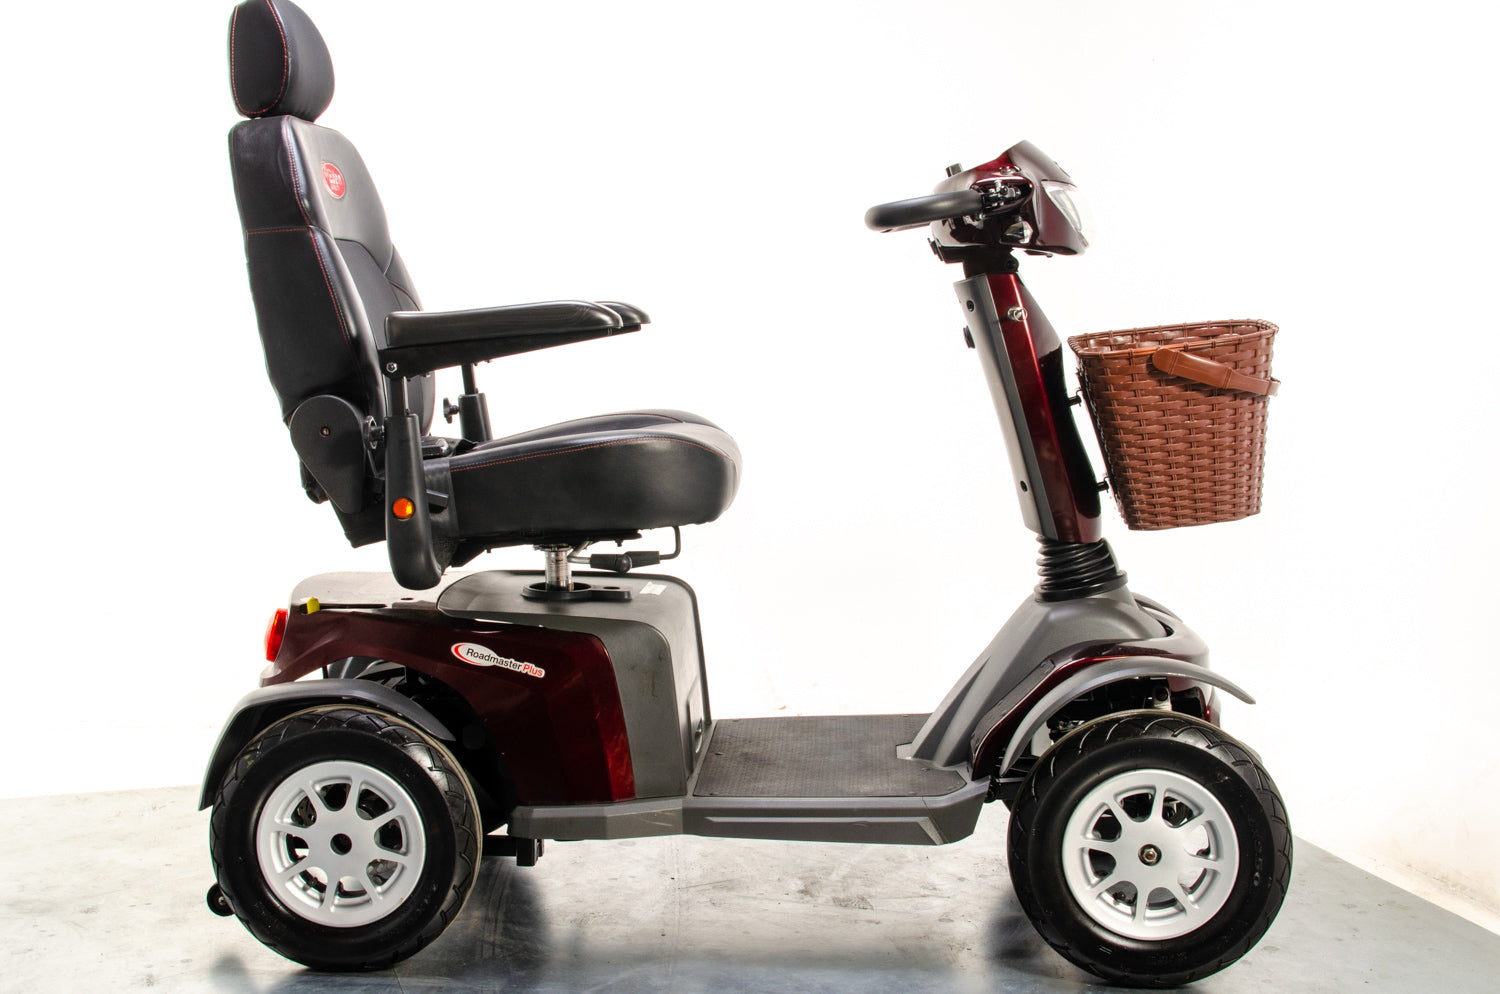 Eden Roadmaster Plus Used Mobility Scooter 8mph Large All Terrain Luxury Electric 13294